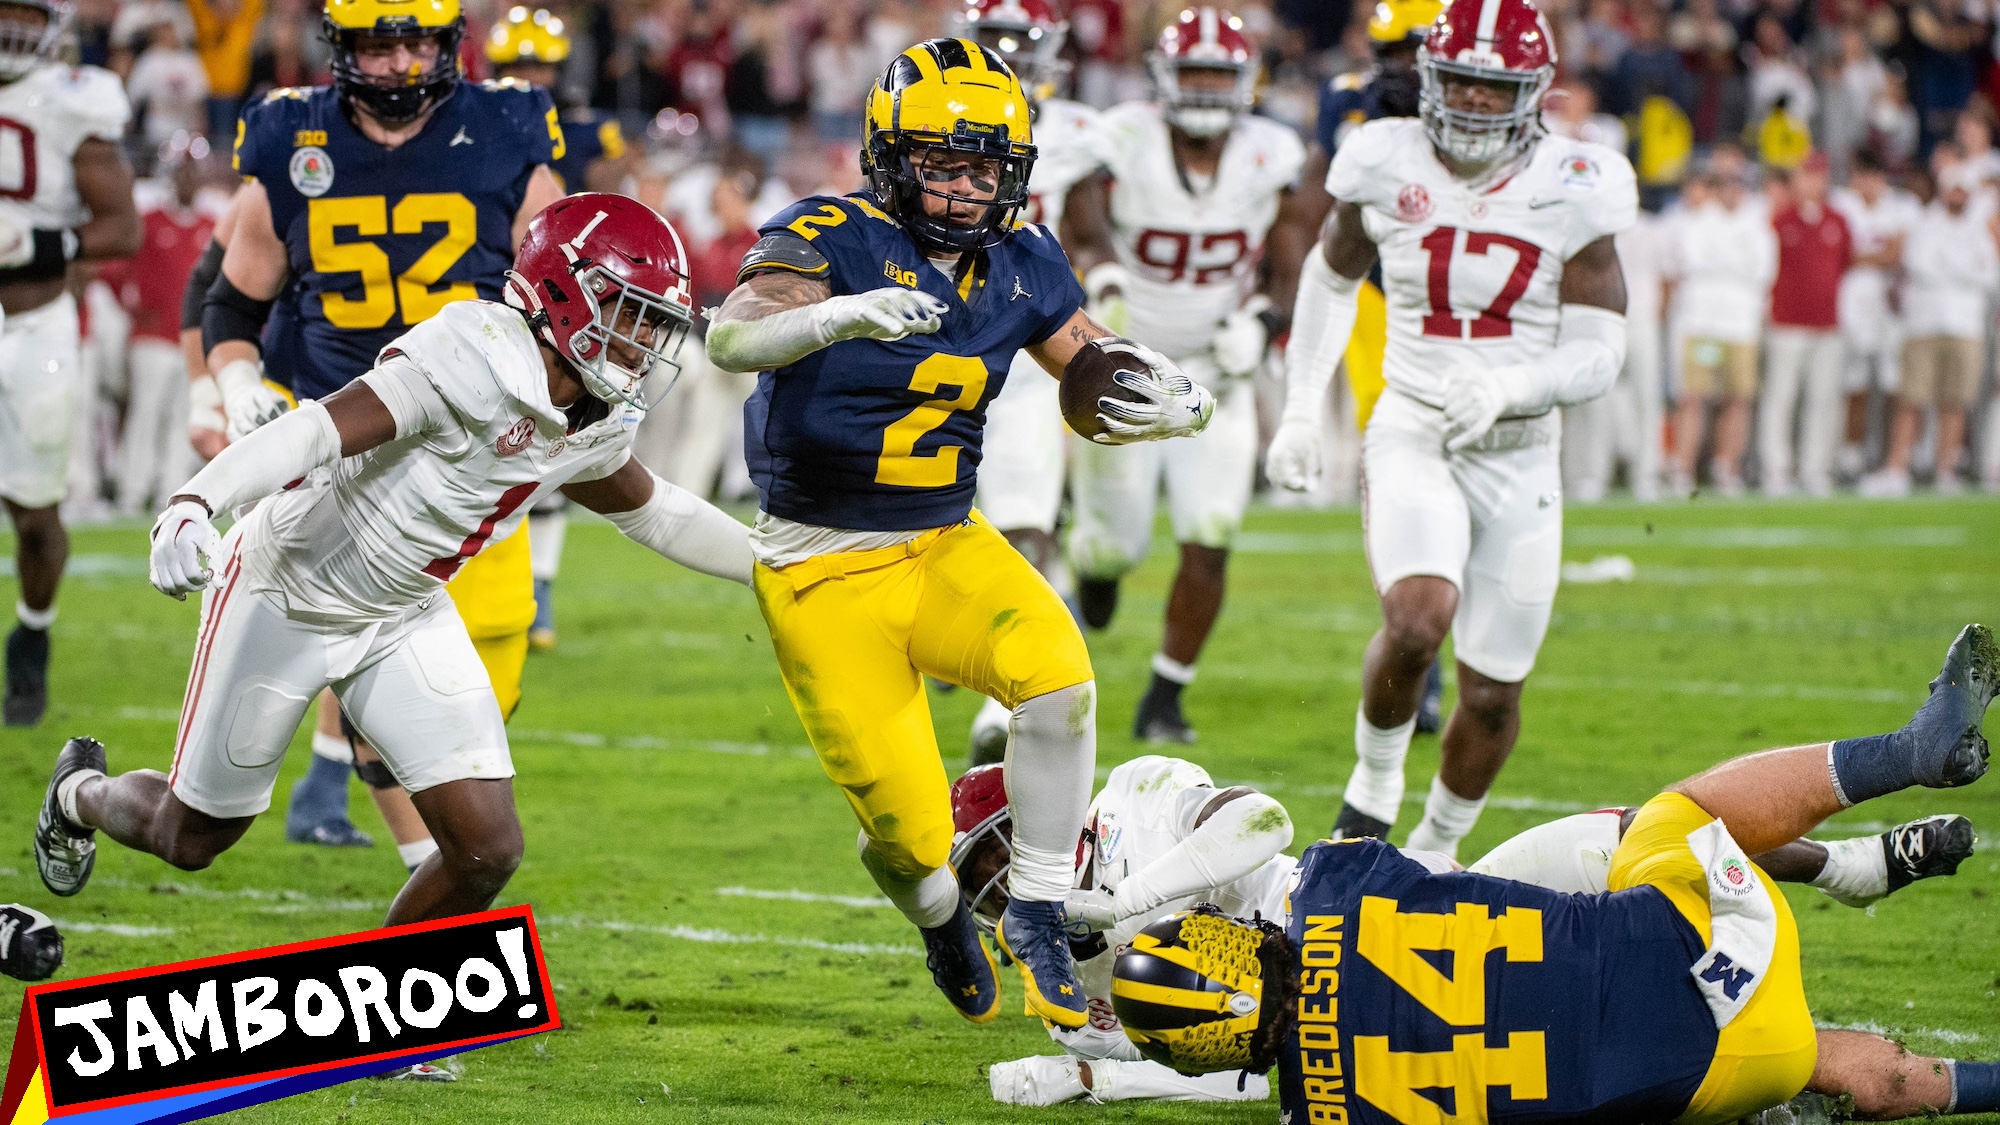 PASADENA, CALIFORNIA - JANUARY 01: Blake Corum #2 of the Michigan Wolverines runs with the ball for yardage away from Terrion Arnold #3 and Kool-Aid McKinstry #1 of the Alabama Crimson Tide during second half of the CFP Semifinal Rose Bowl Game at Rose Bowl Stadium on January 01, 2024 in Pasadena, California. The Michigan Wolverines won the game 27-20 in overtime. (Photo by Aaron J. Thornton/Getty Images)